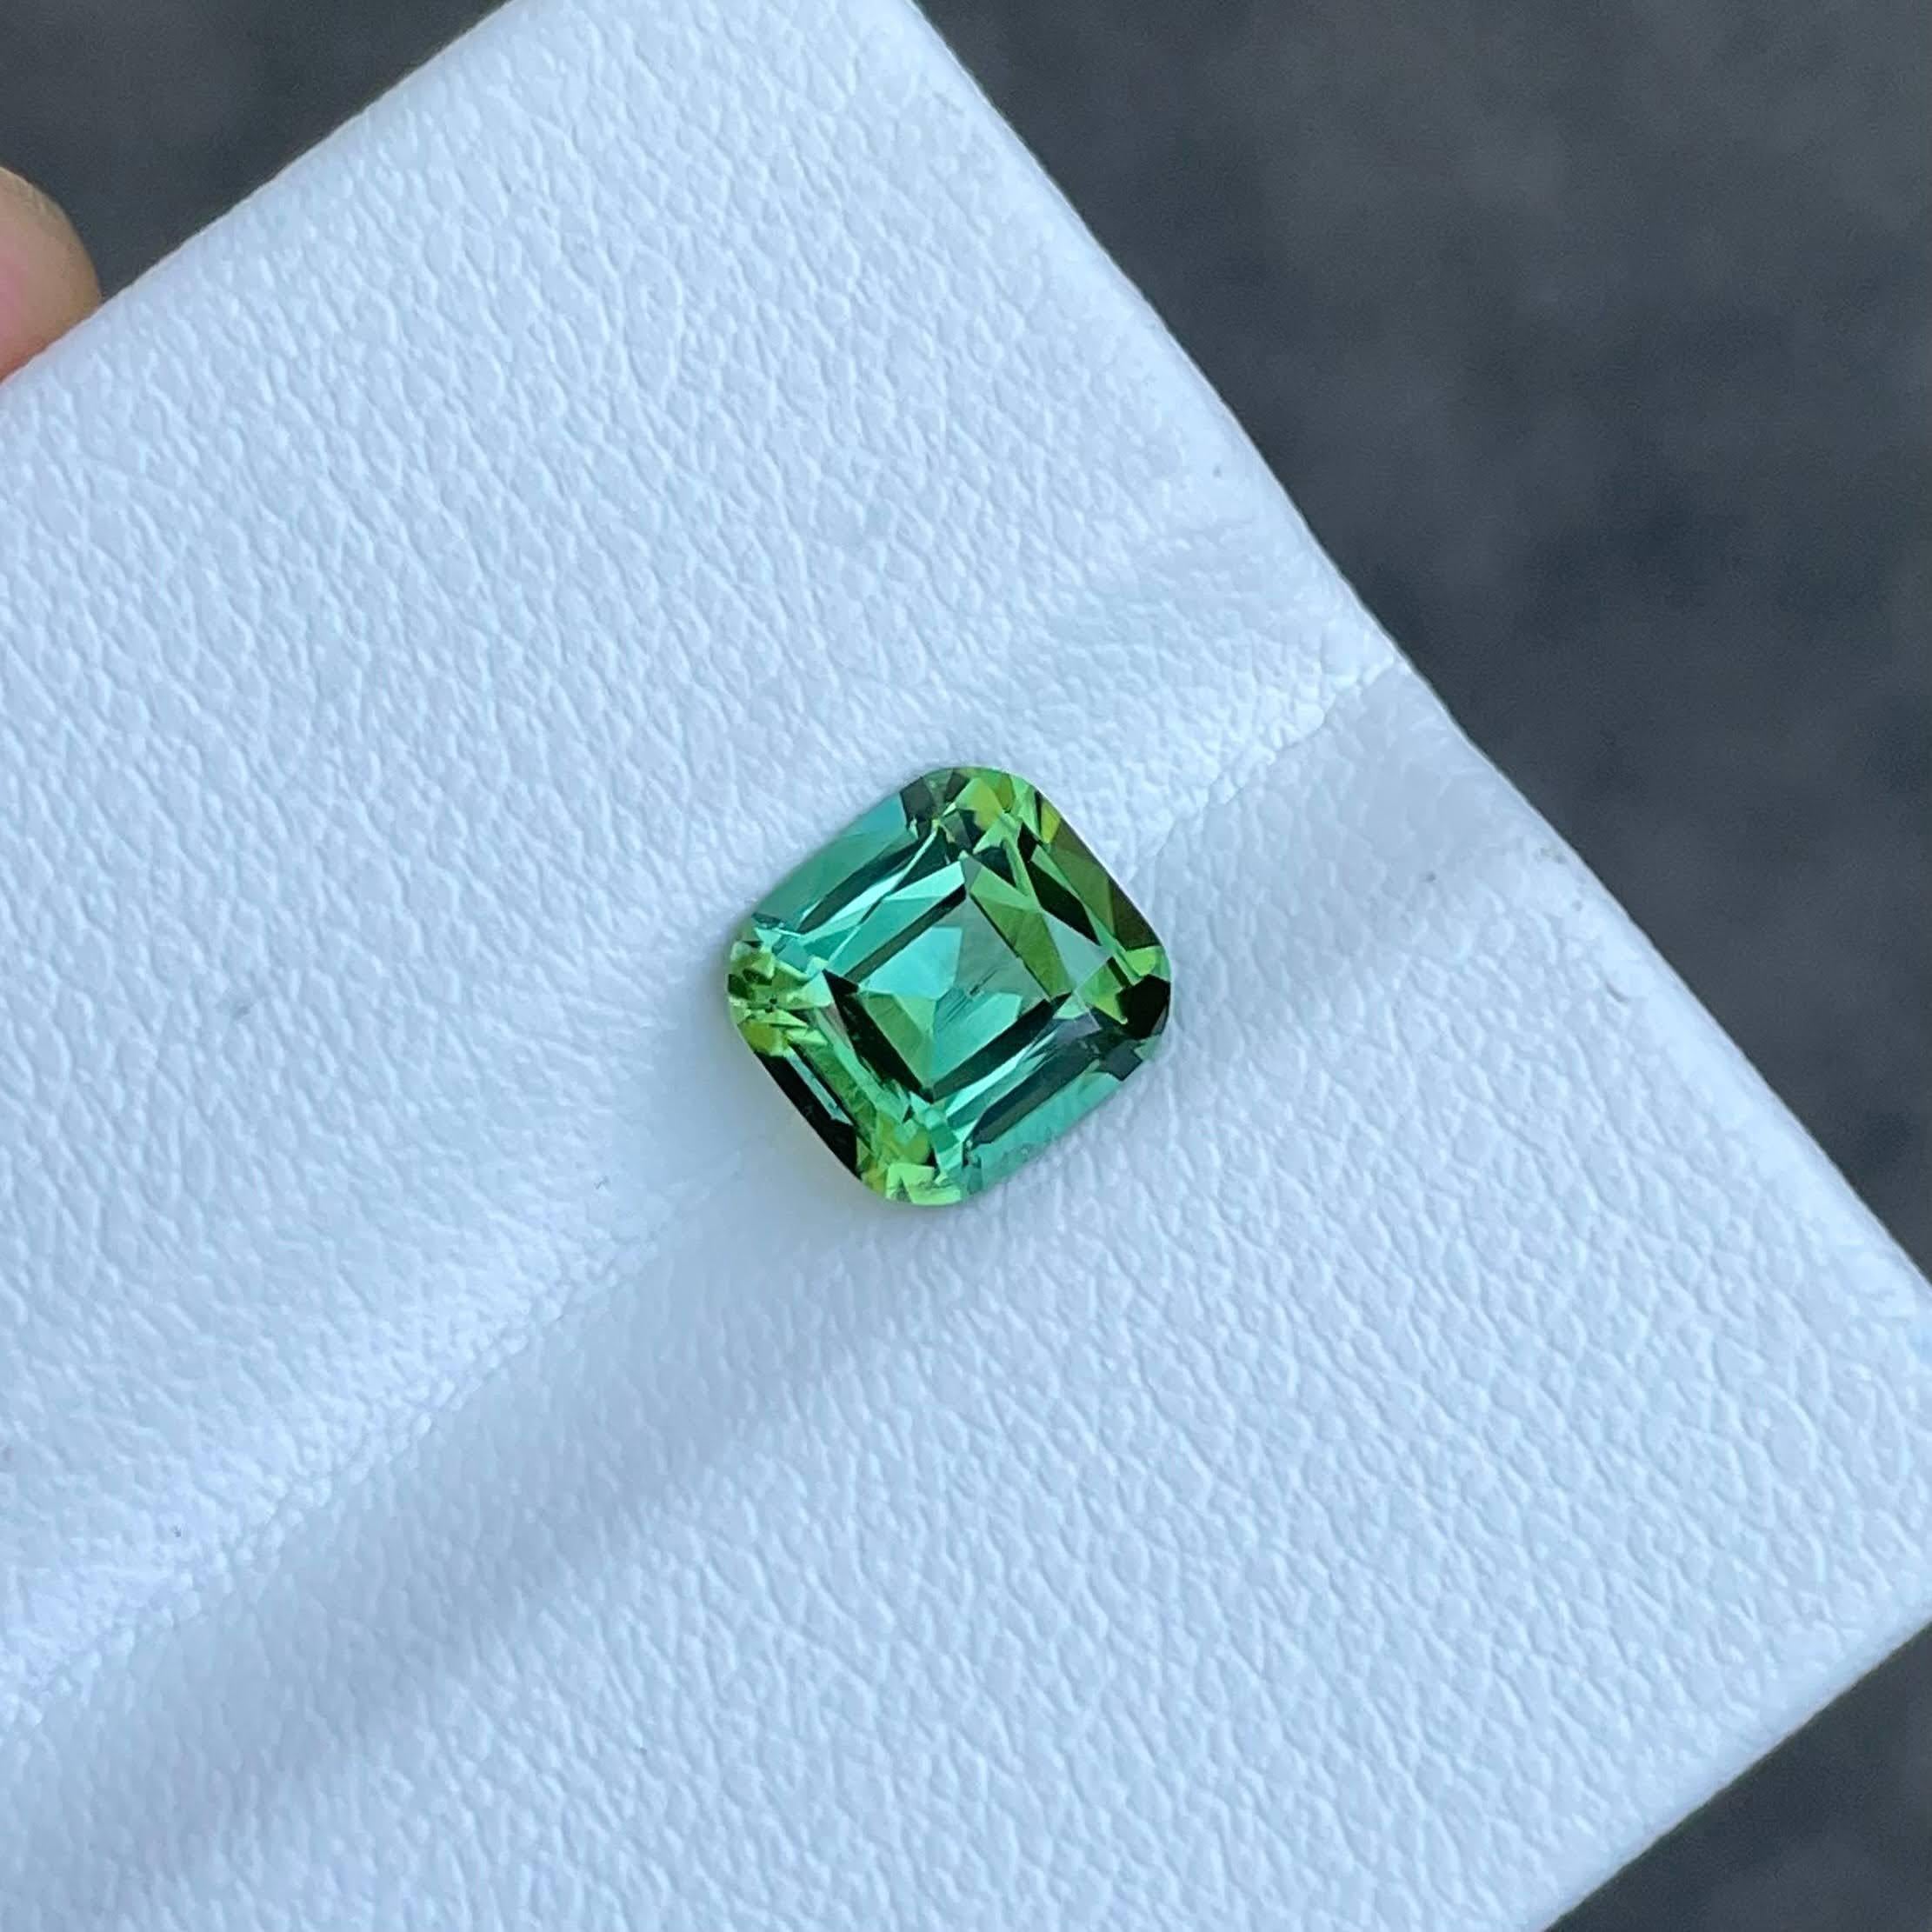 Weight 1.75 carats 
Dimensions 7.6x7.2x4.7 mm
Treatment none 
Origin Afghanistan 
Clarity VVS
Shape cushion 
Cut fancy cushion 





Behold the exquisite allure of a 1.75 carat Mint Green Tourmaline, skillfully fashioned into a Fancy Cushion Cut,